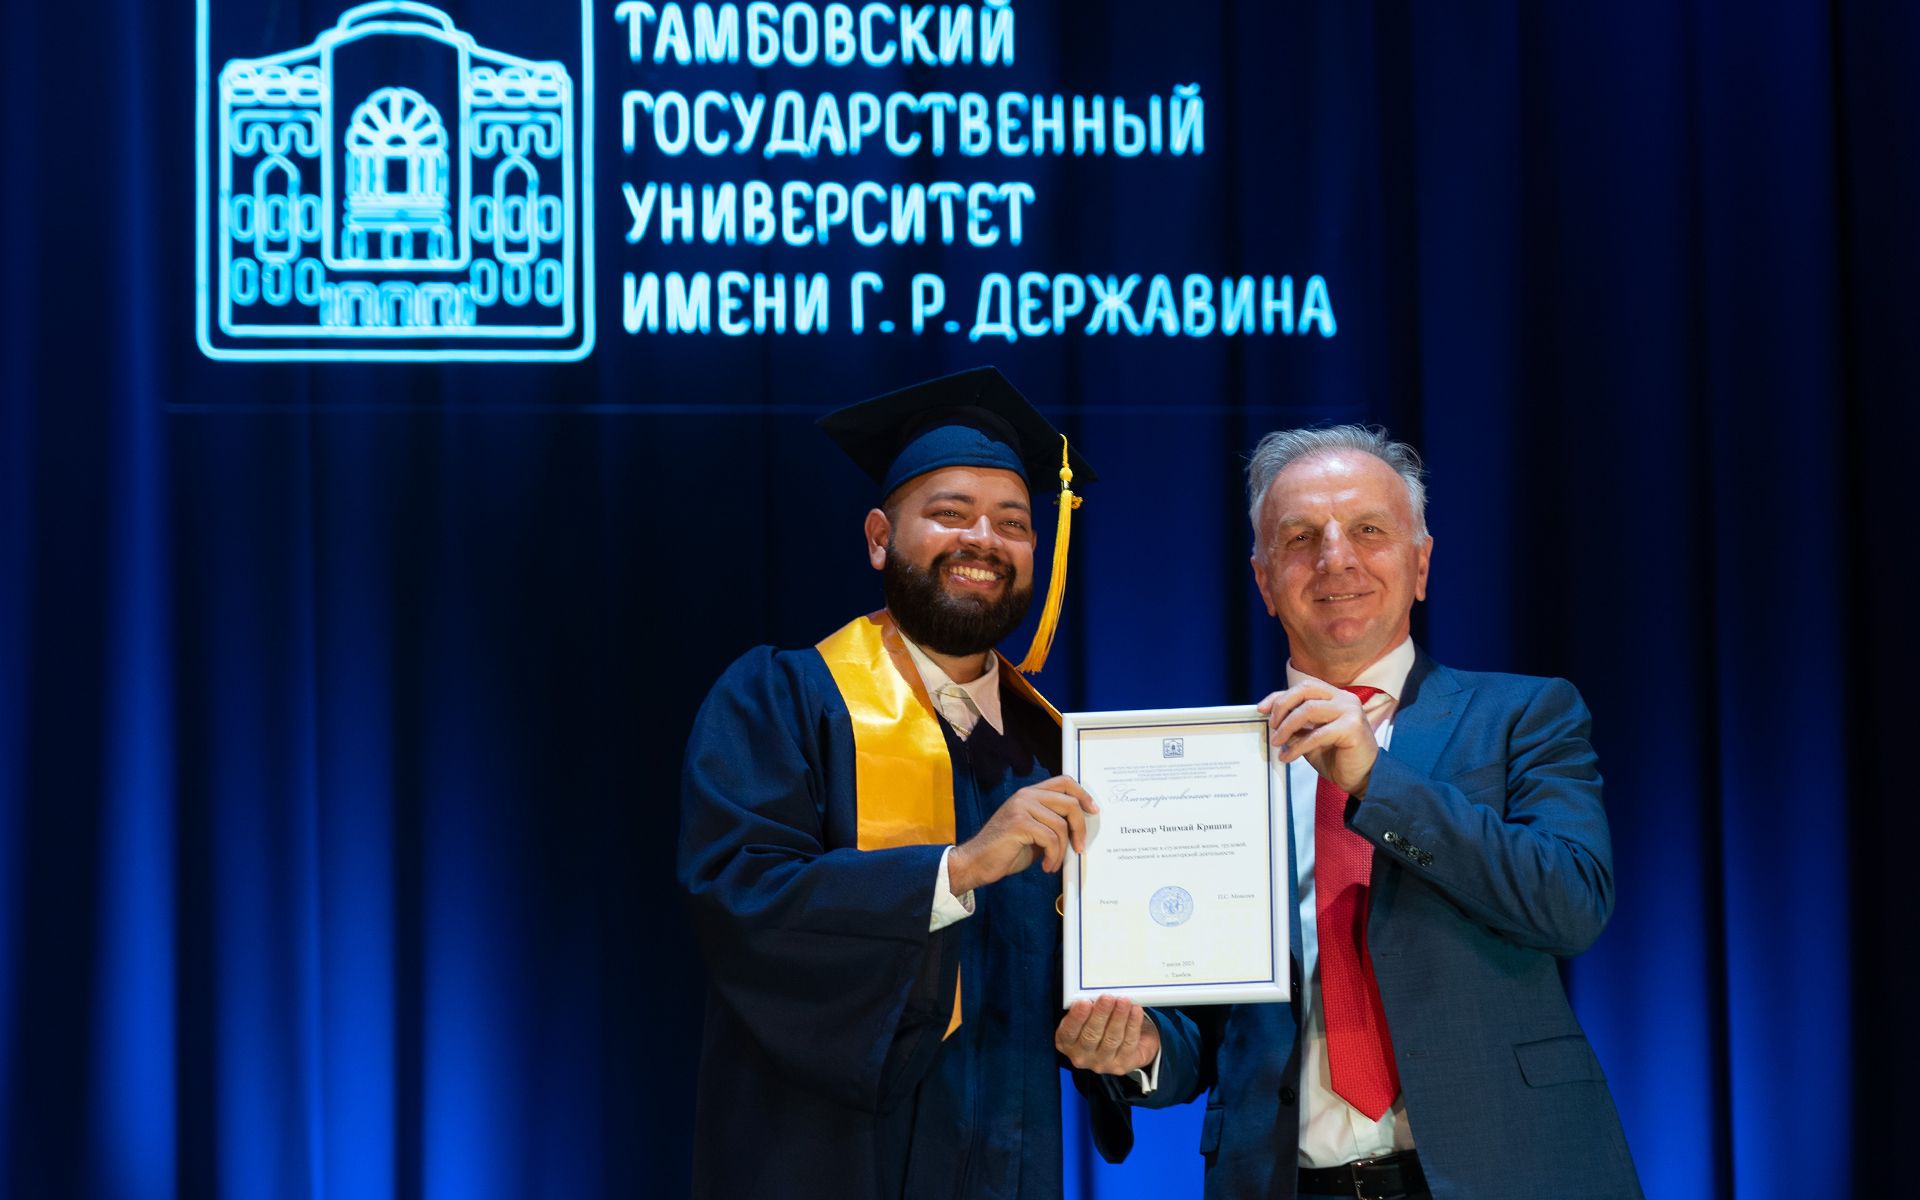 The group of Russian state universities RACUS always pays special attention to the organization of graduation ceremonies of its TOP 20 universities: farewell to the era of studying in Russia should stay in the hearts of our dear graduates forever. A vivid final chord of their university years! Over the many years of studies, our students have become a large international family, gained new unforgettable experience, met outstanding professionals, made friends from all over the world, became more mature and took a new look at their lives. Now they will make their parents and homelands proud of their achievements, take leading positions in the labor markets, open their own businesses and, we are sure, will continue their professional development, reaching new heights. Purposeful, ambitious, inquisitive, open and hardworking — our students are the best.